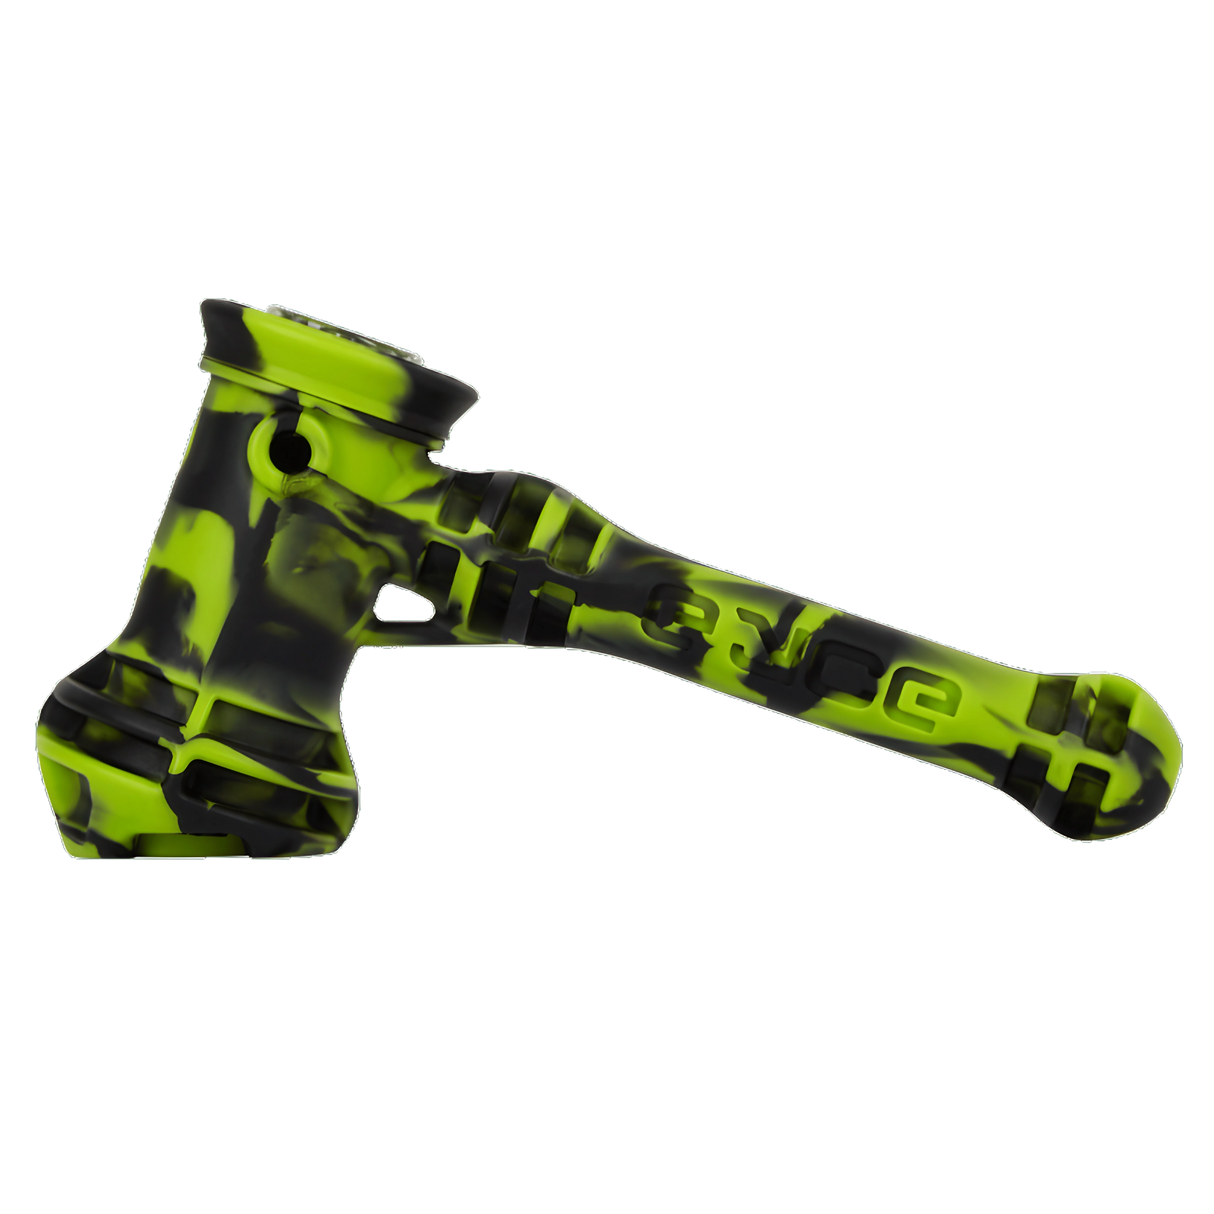 Eyce Hammer silicone bubbler in green and black camouflage, portable design with steel bowl